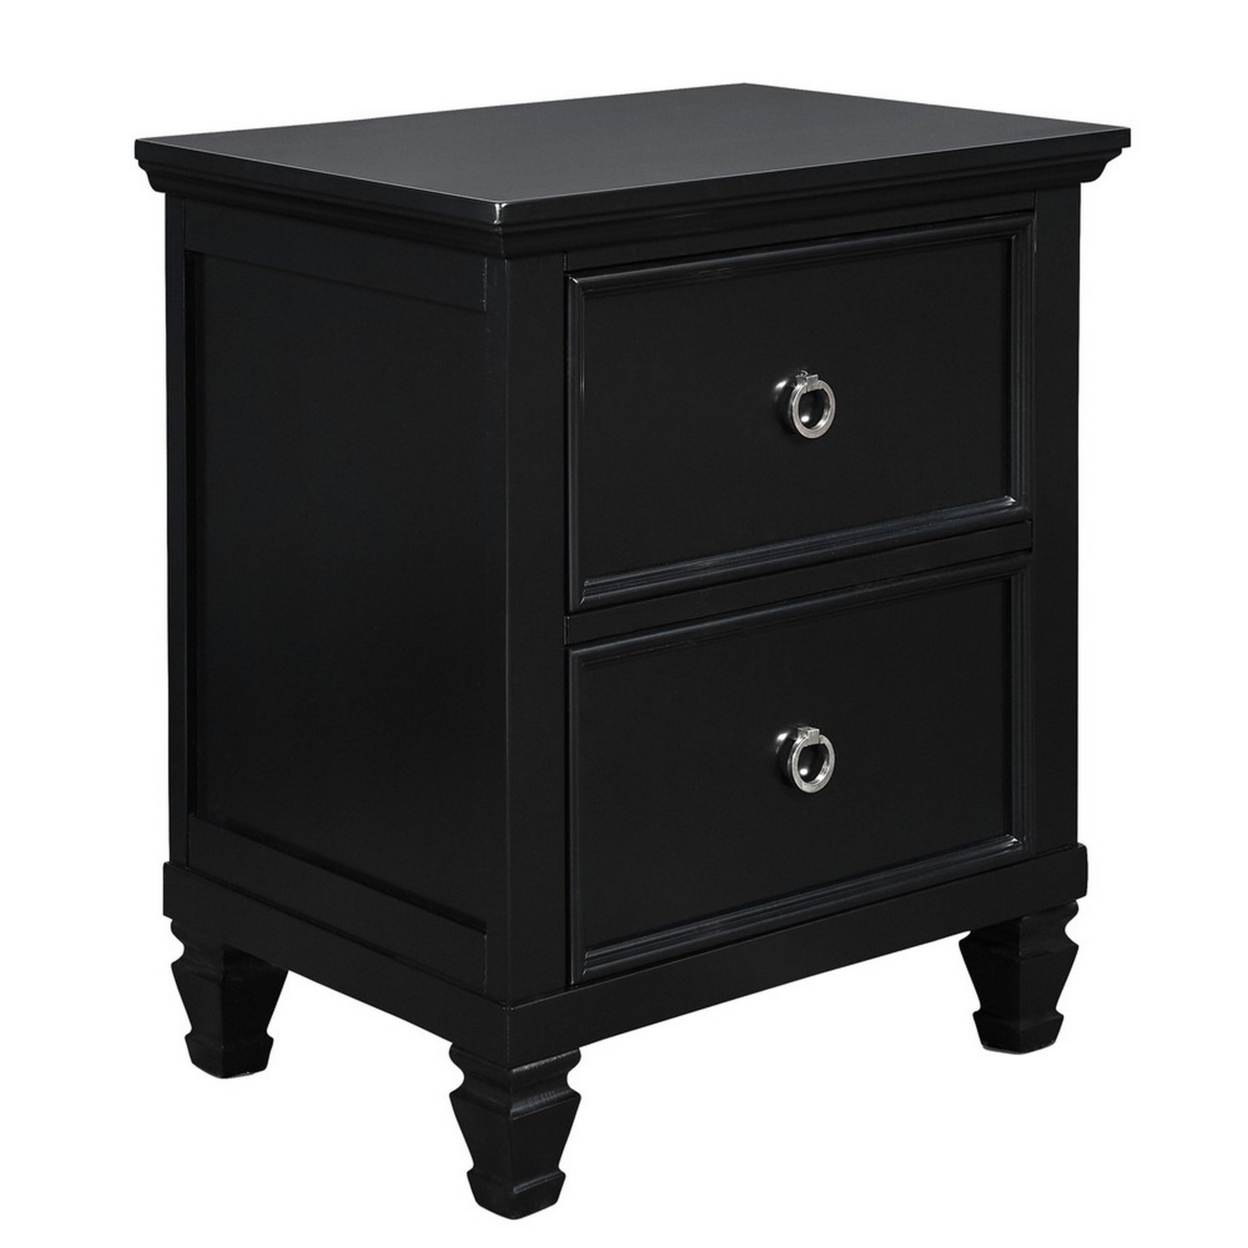 2 Drawer Wooden Nightstand With Tapered Legs And Metal Rings, Black- Saltoro Sherpi